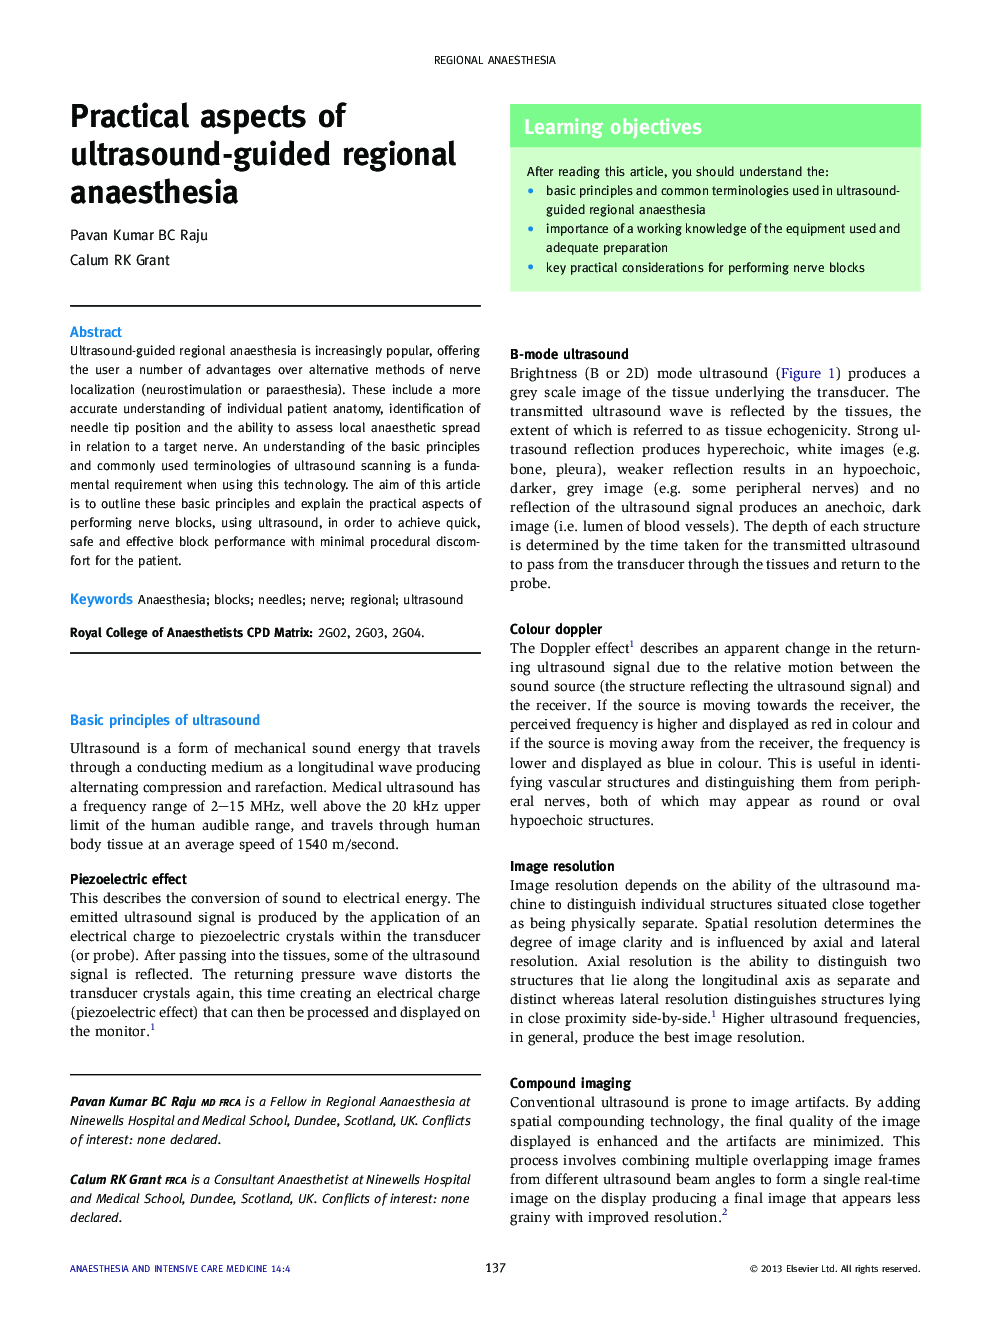 Practical aspects of ultrasound-guided regional anaesthesia